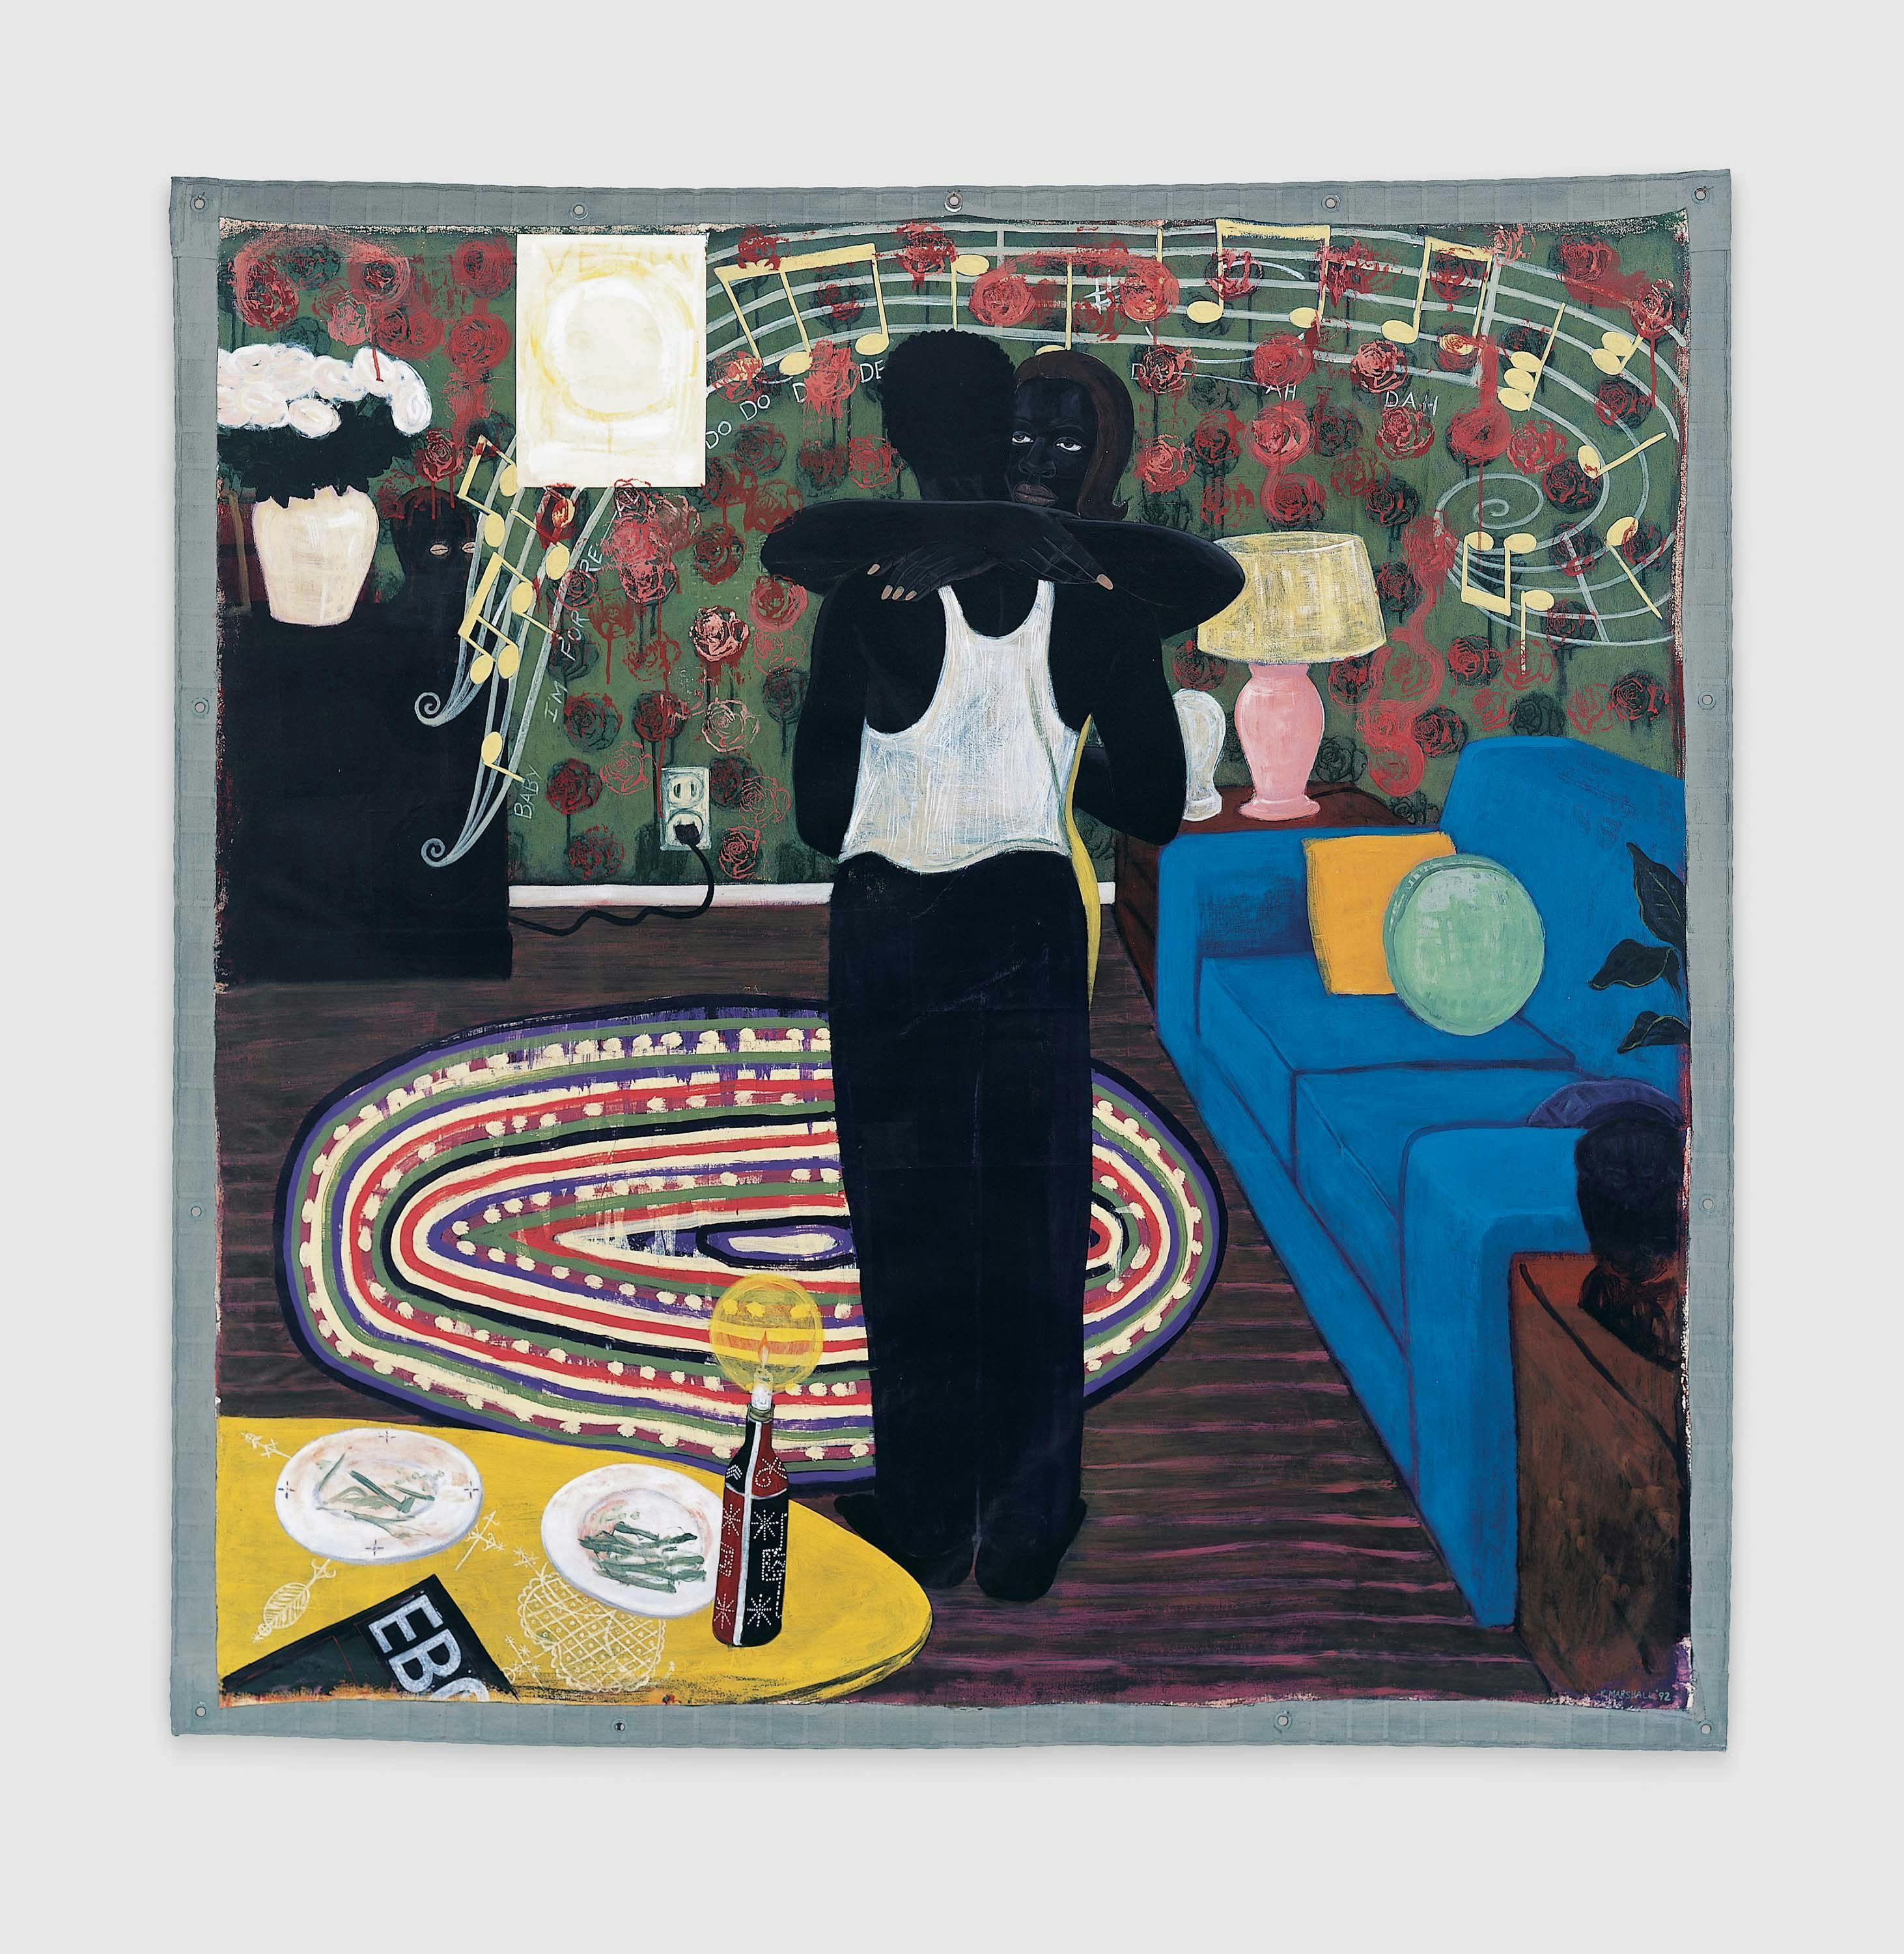 A painting by Kerry James Marshall, titled Slow Dance, 1992 to 1993.